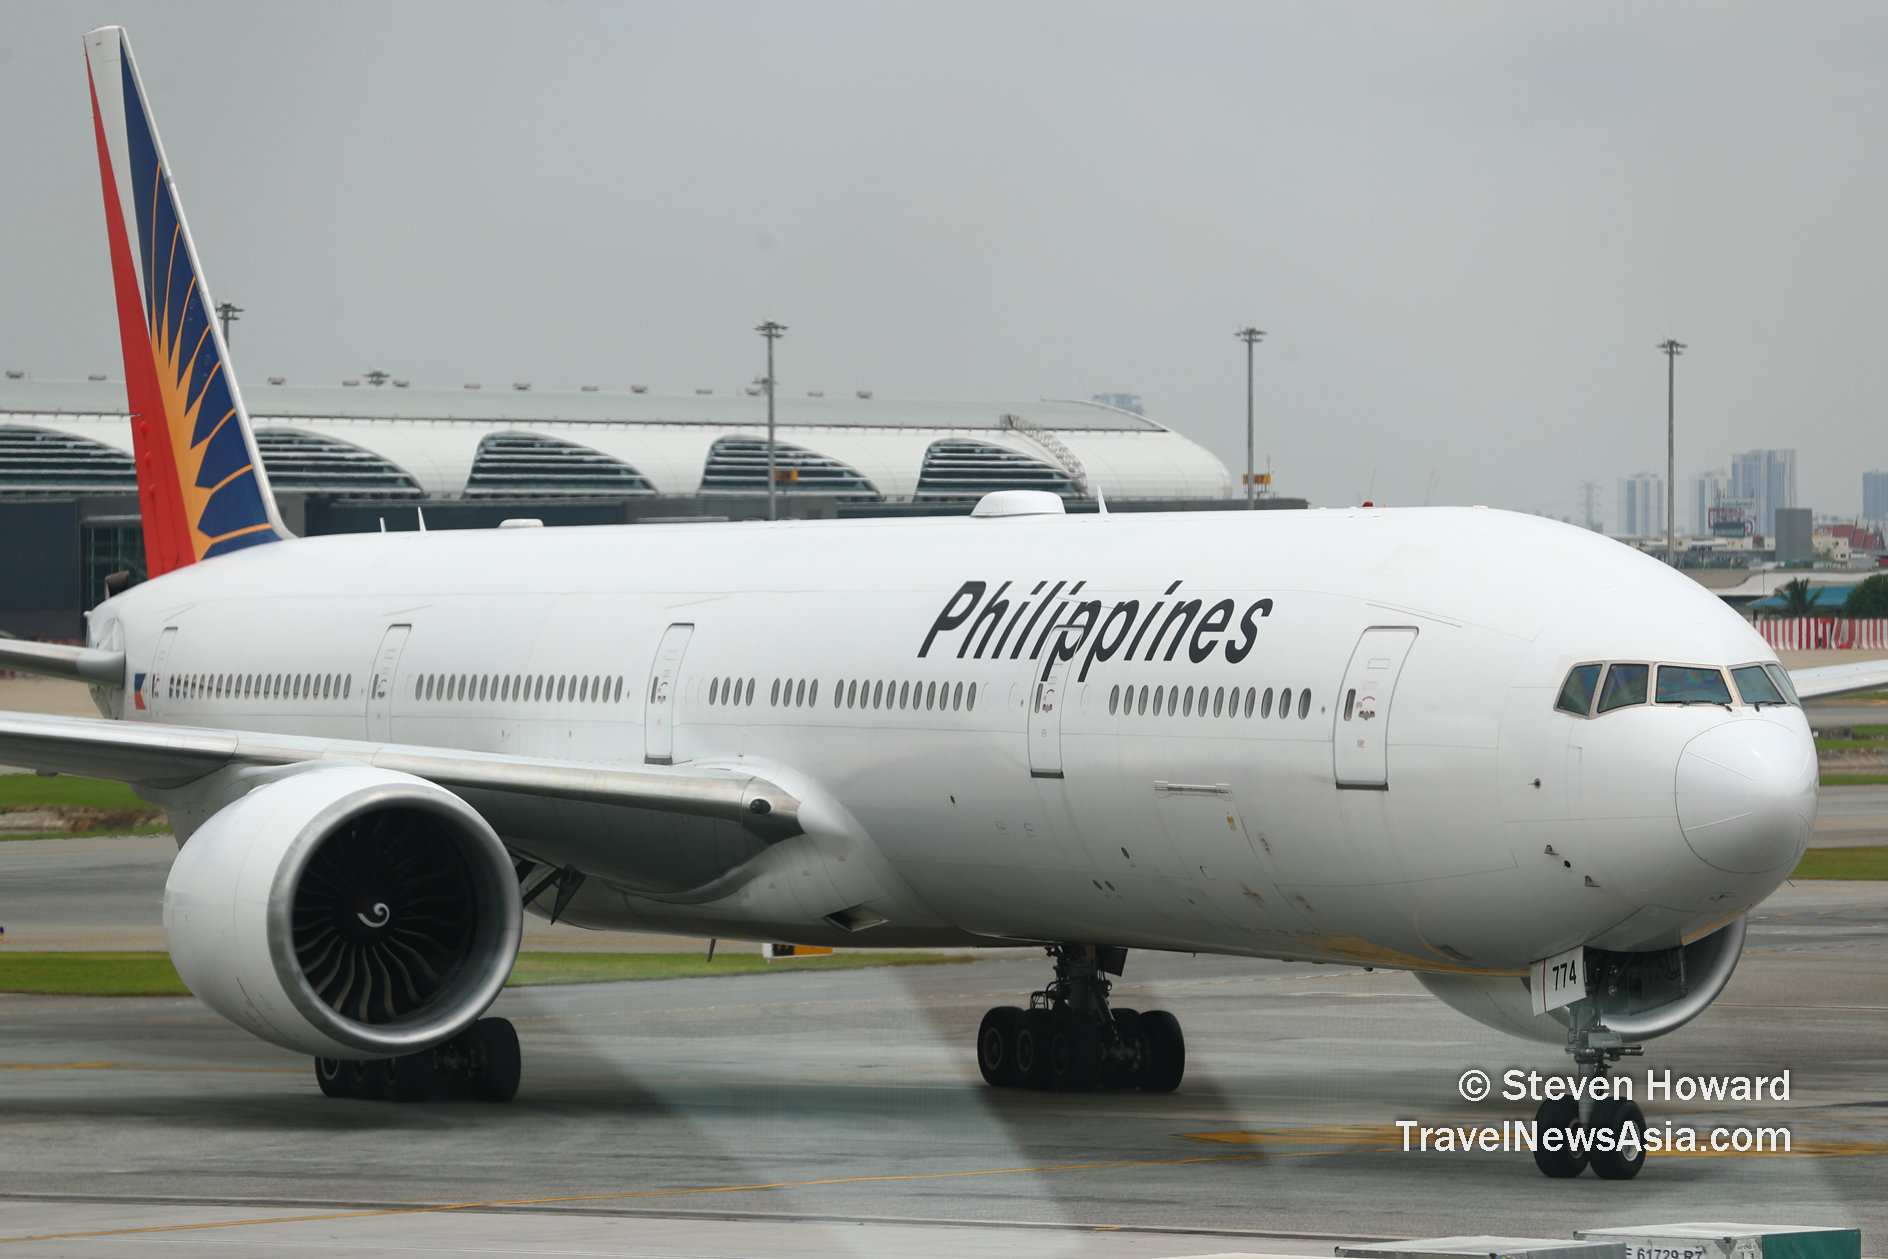 Philippine Airlines (PAL) Boeing 777. Picture by Steven Howard of TravelNewsAsia.com Click to enlarge.